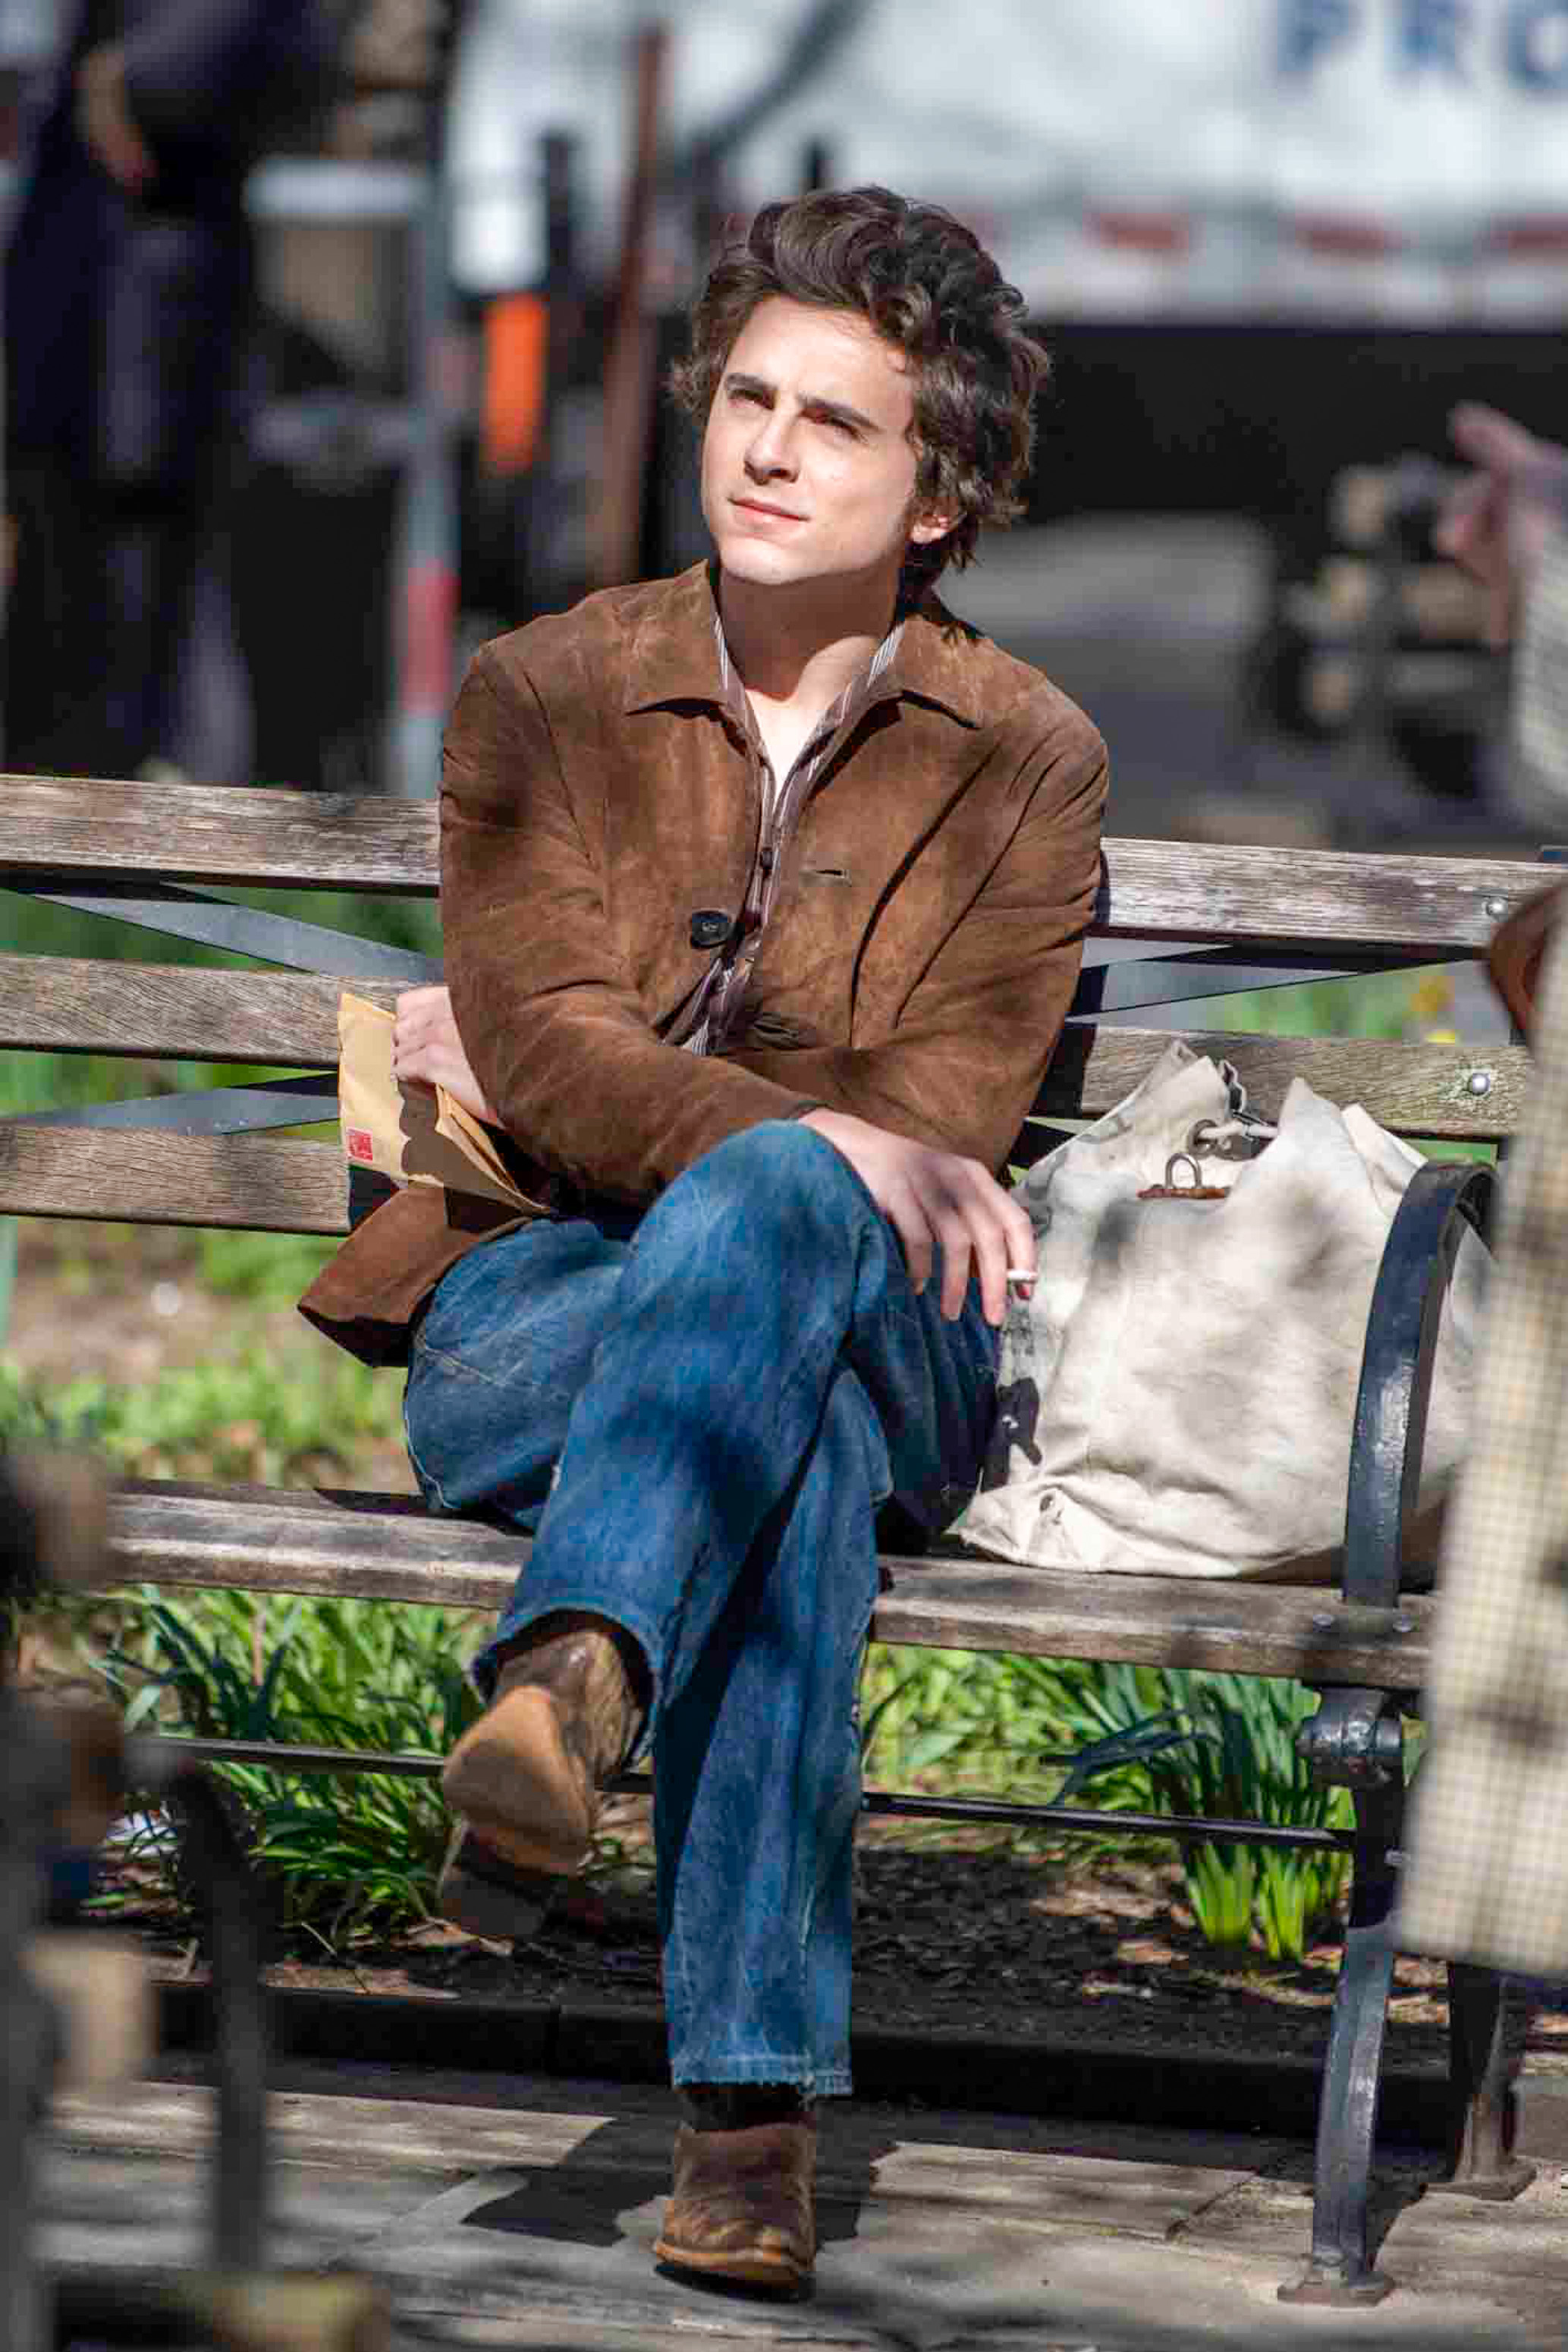 Timmy sitting on park bench with his legs crossed, wearing a brown jacket and jeans, with a tote bag beside him